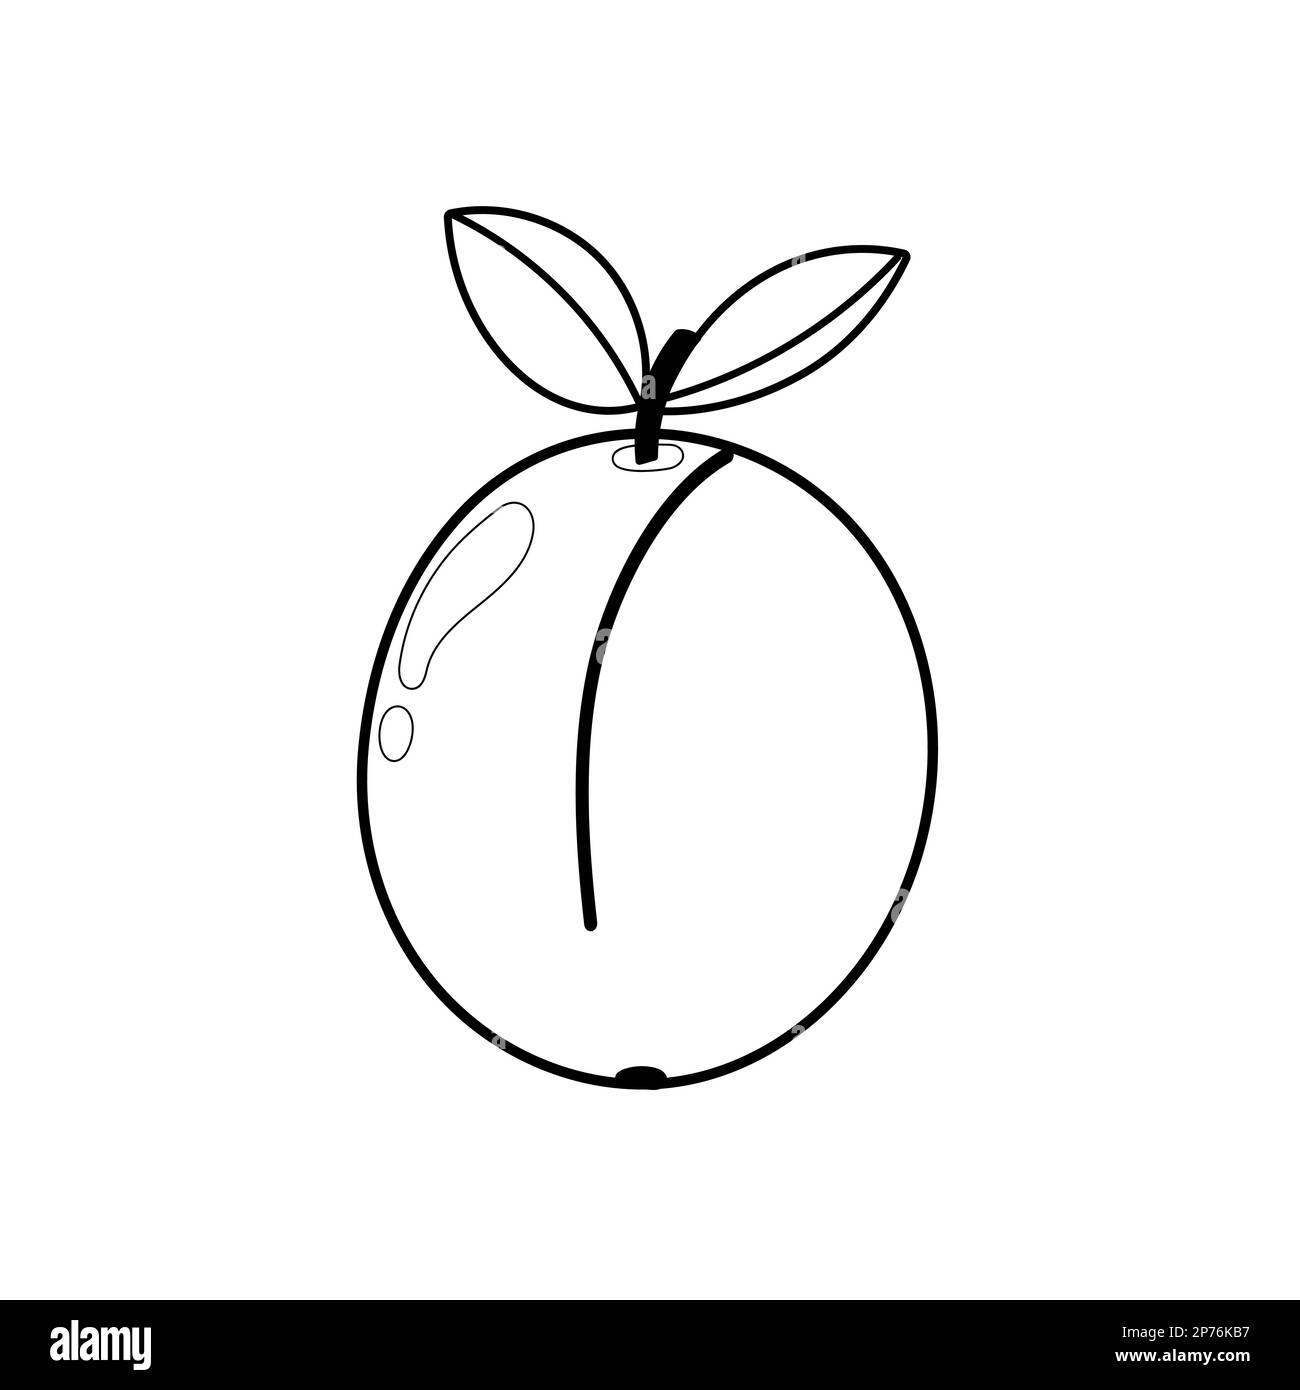 Apricot coloring page for adults and kids. Black and white print with fruit Stock Vector